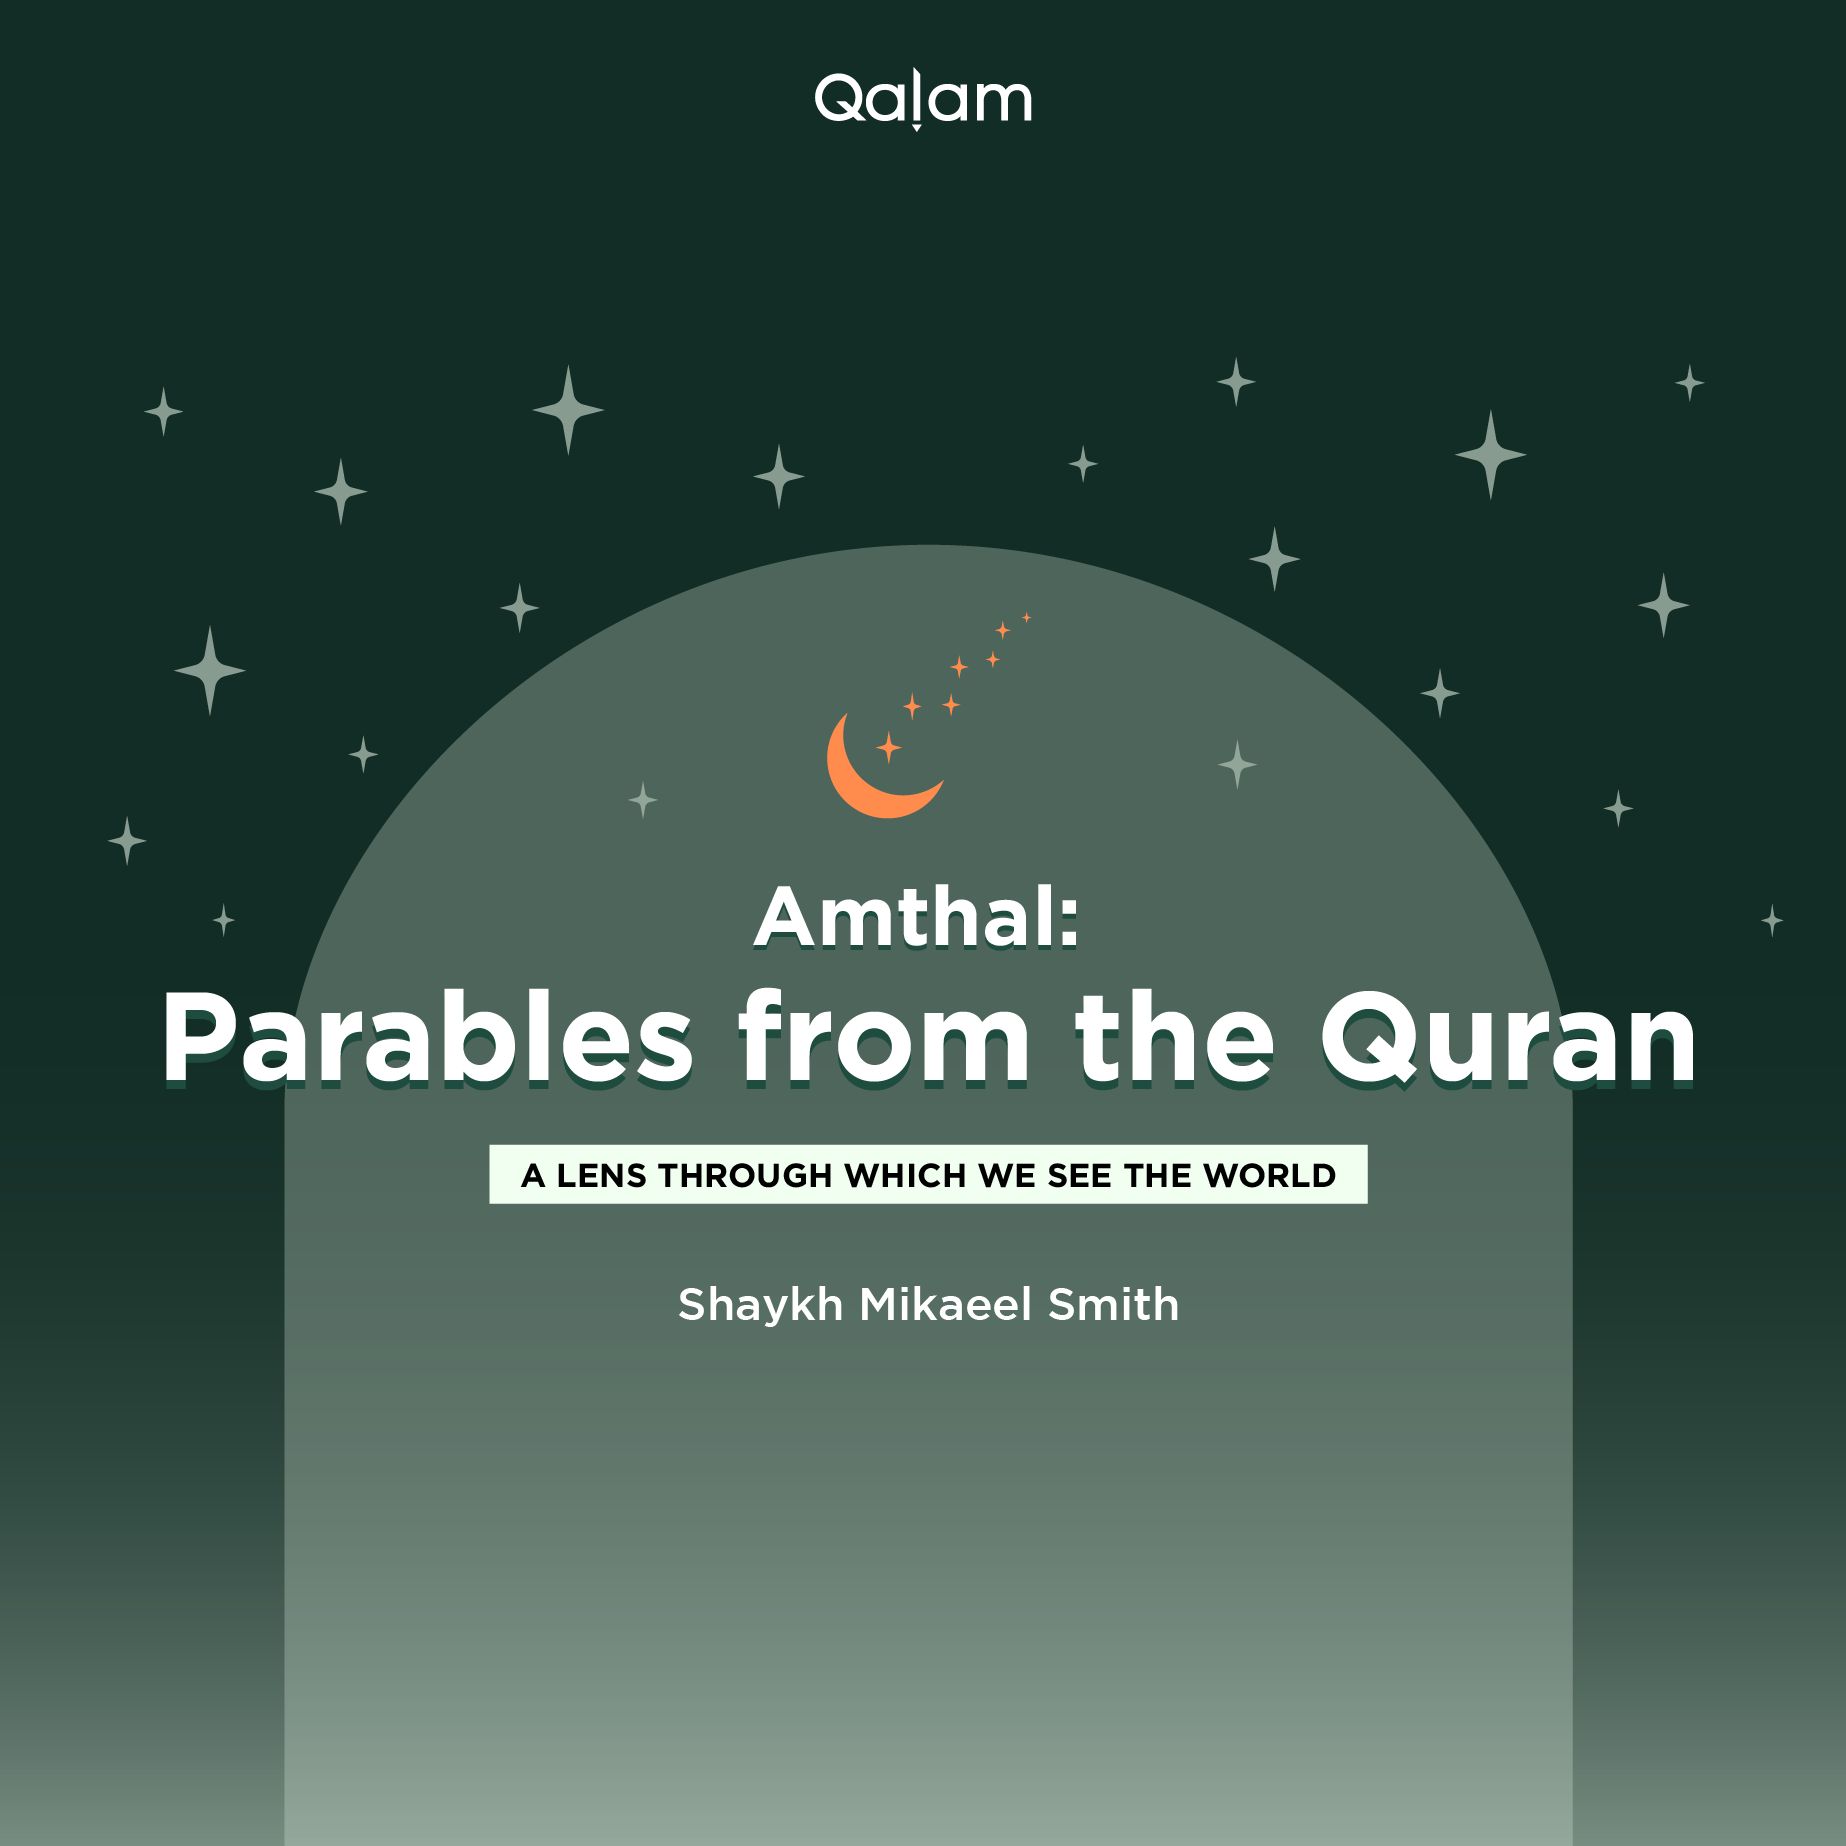 Parables from the Qur’an: EP3